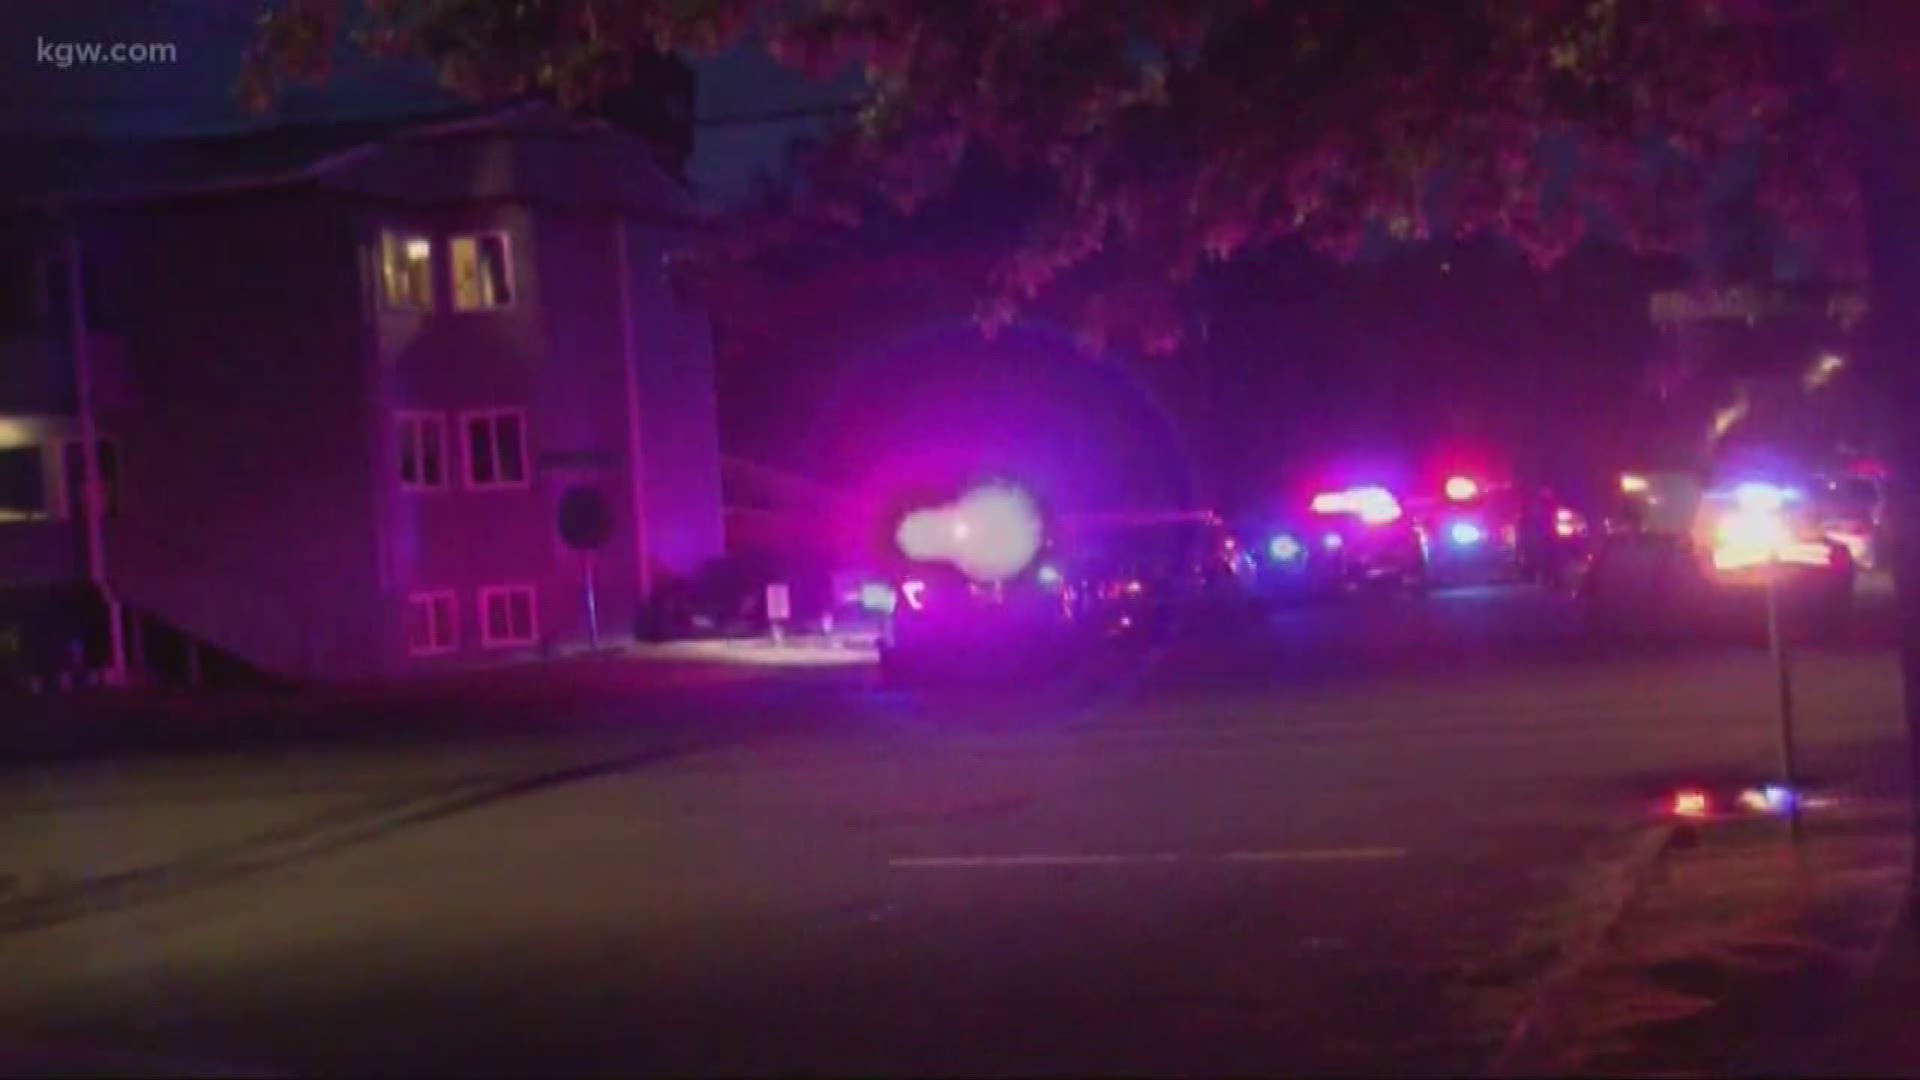 A police officer conducting a traffic stop was shot in Salem on Tuesday night.